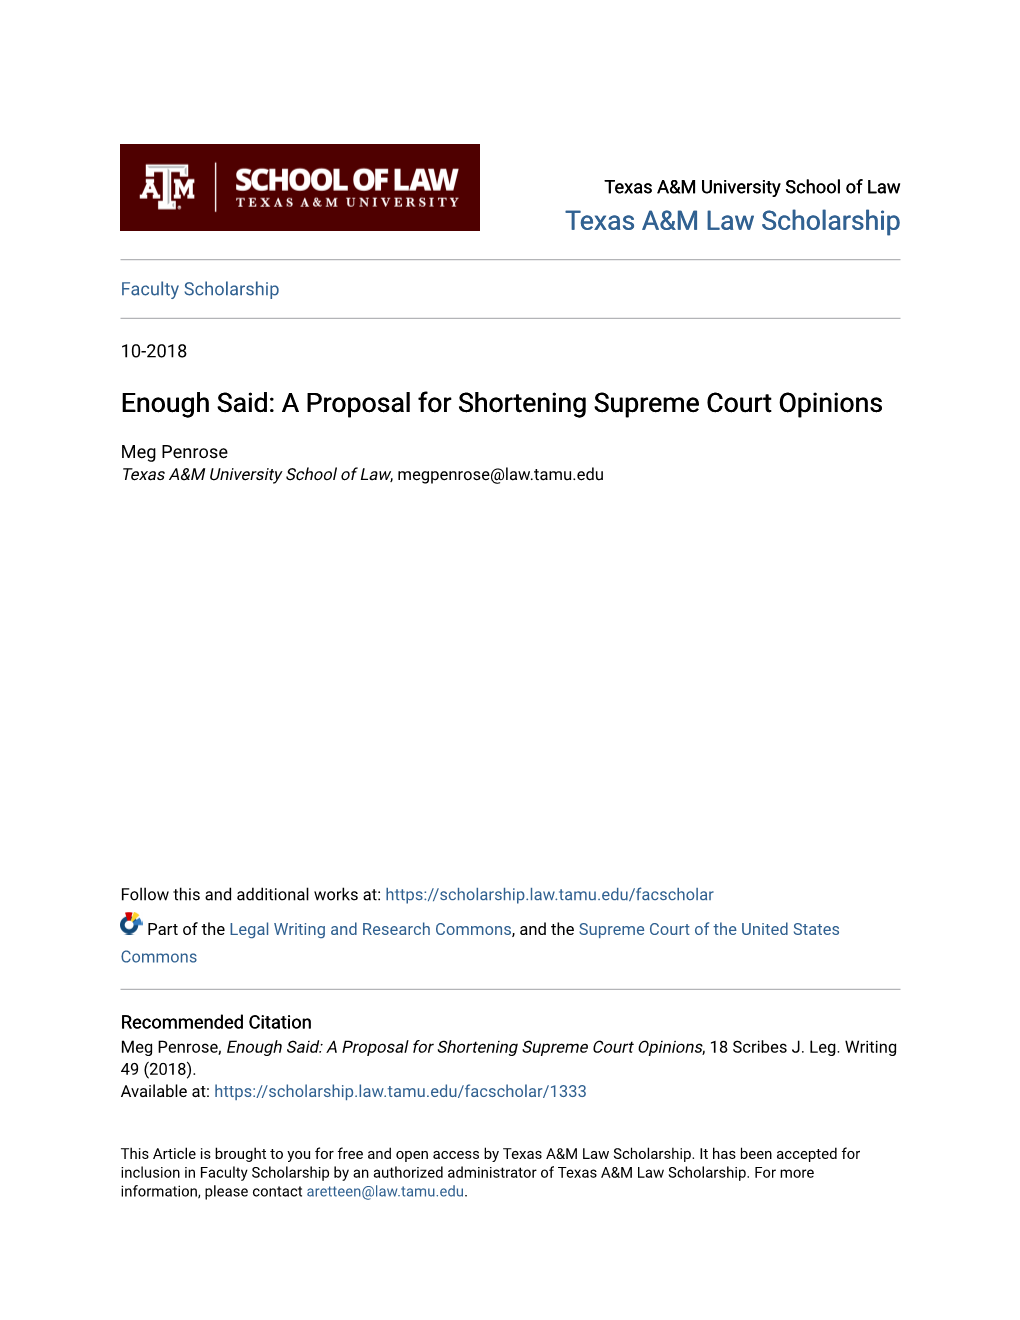 A Proposal for Shortening Supreme Court Opinions